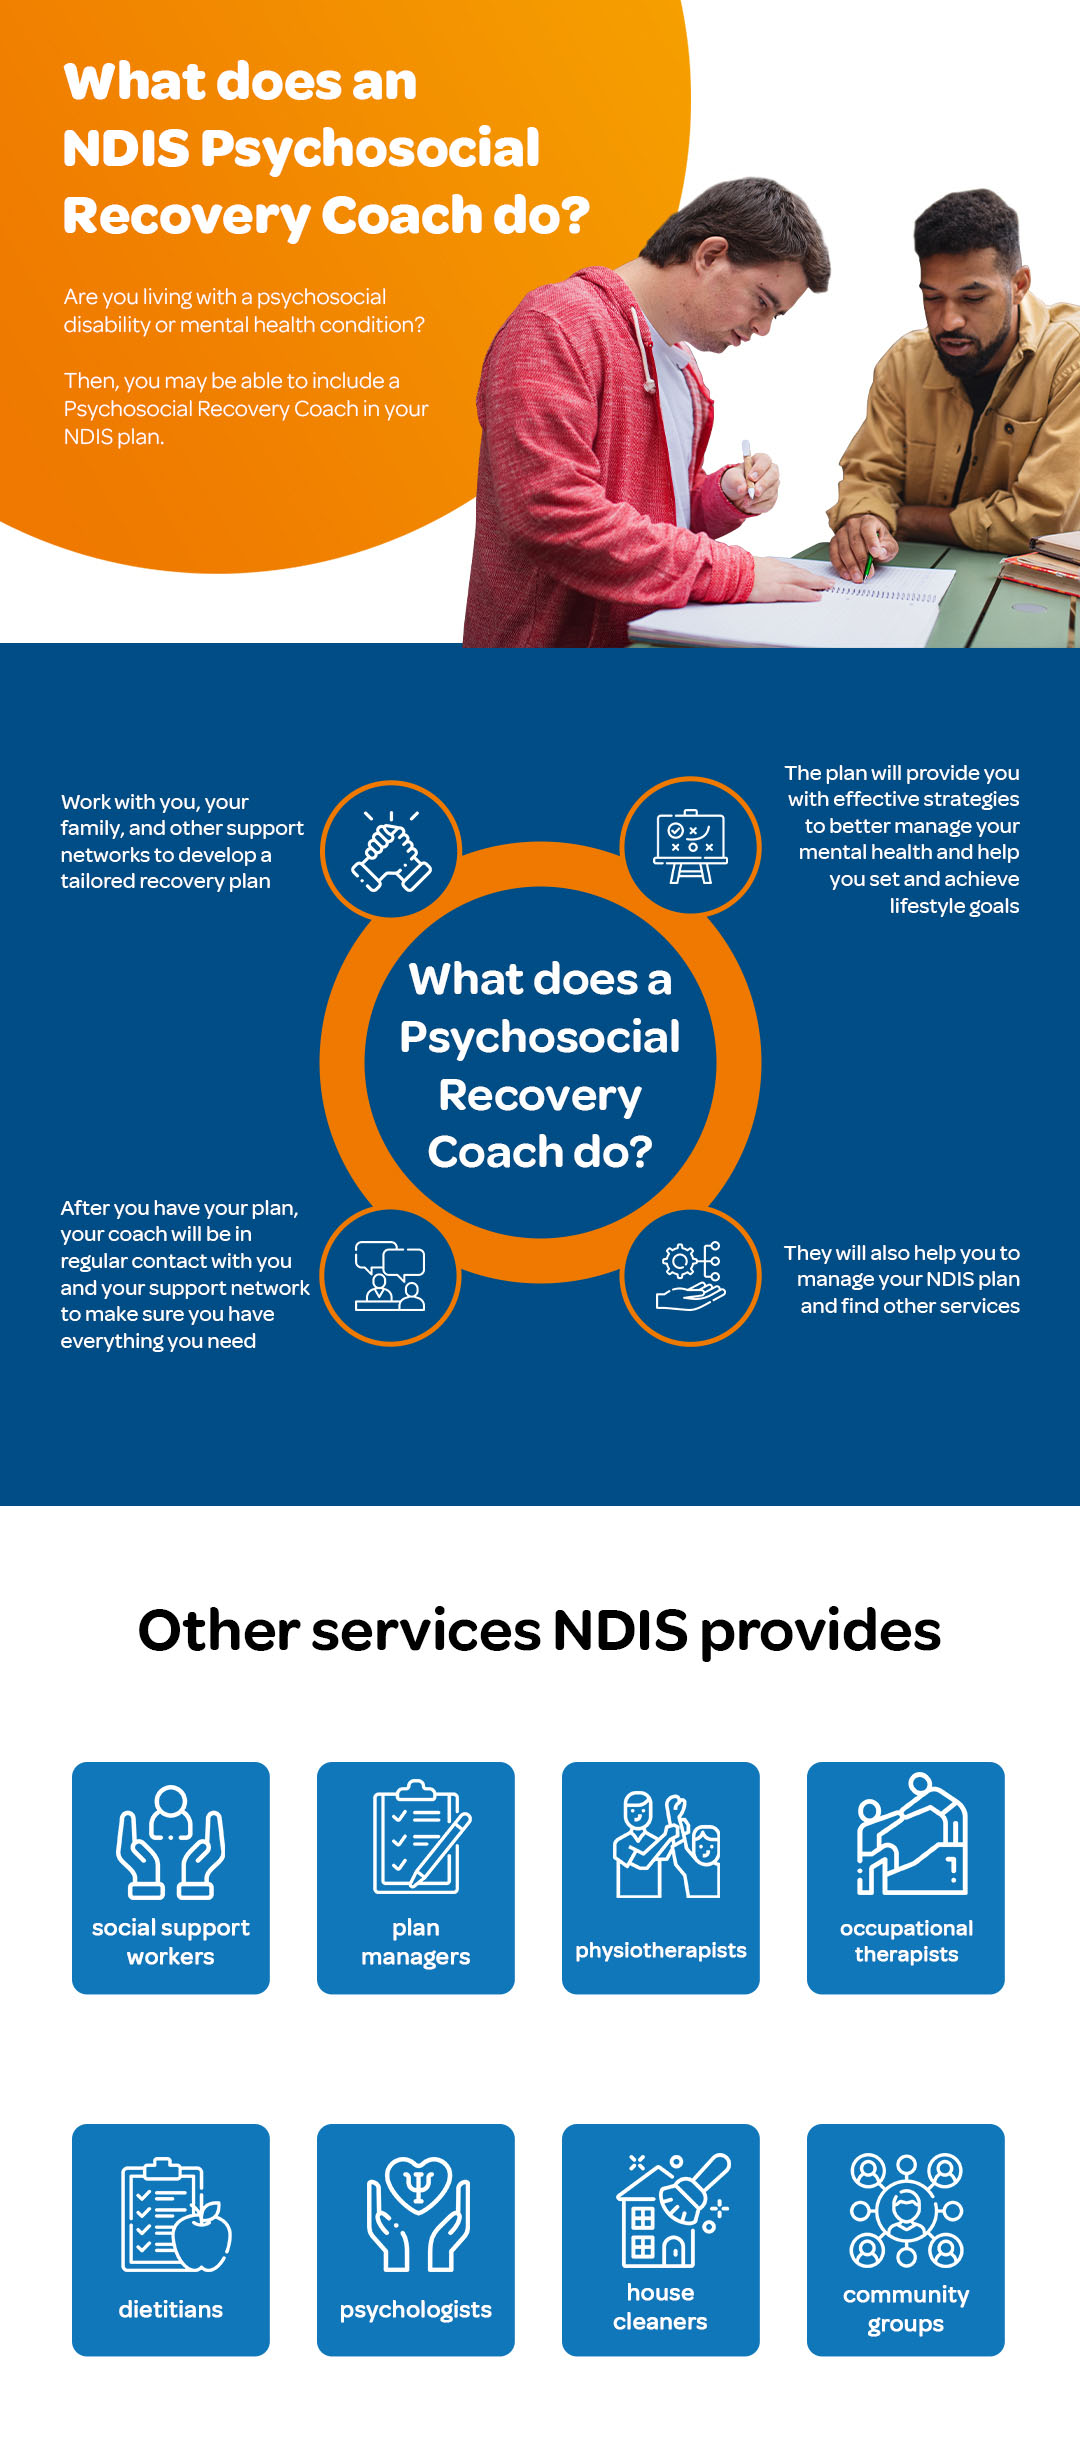 What Does an NDIS Psychosocial Recovery Coach Do?